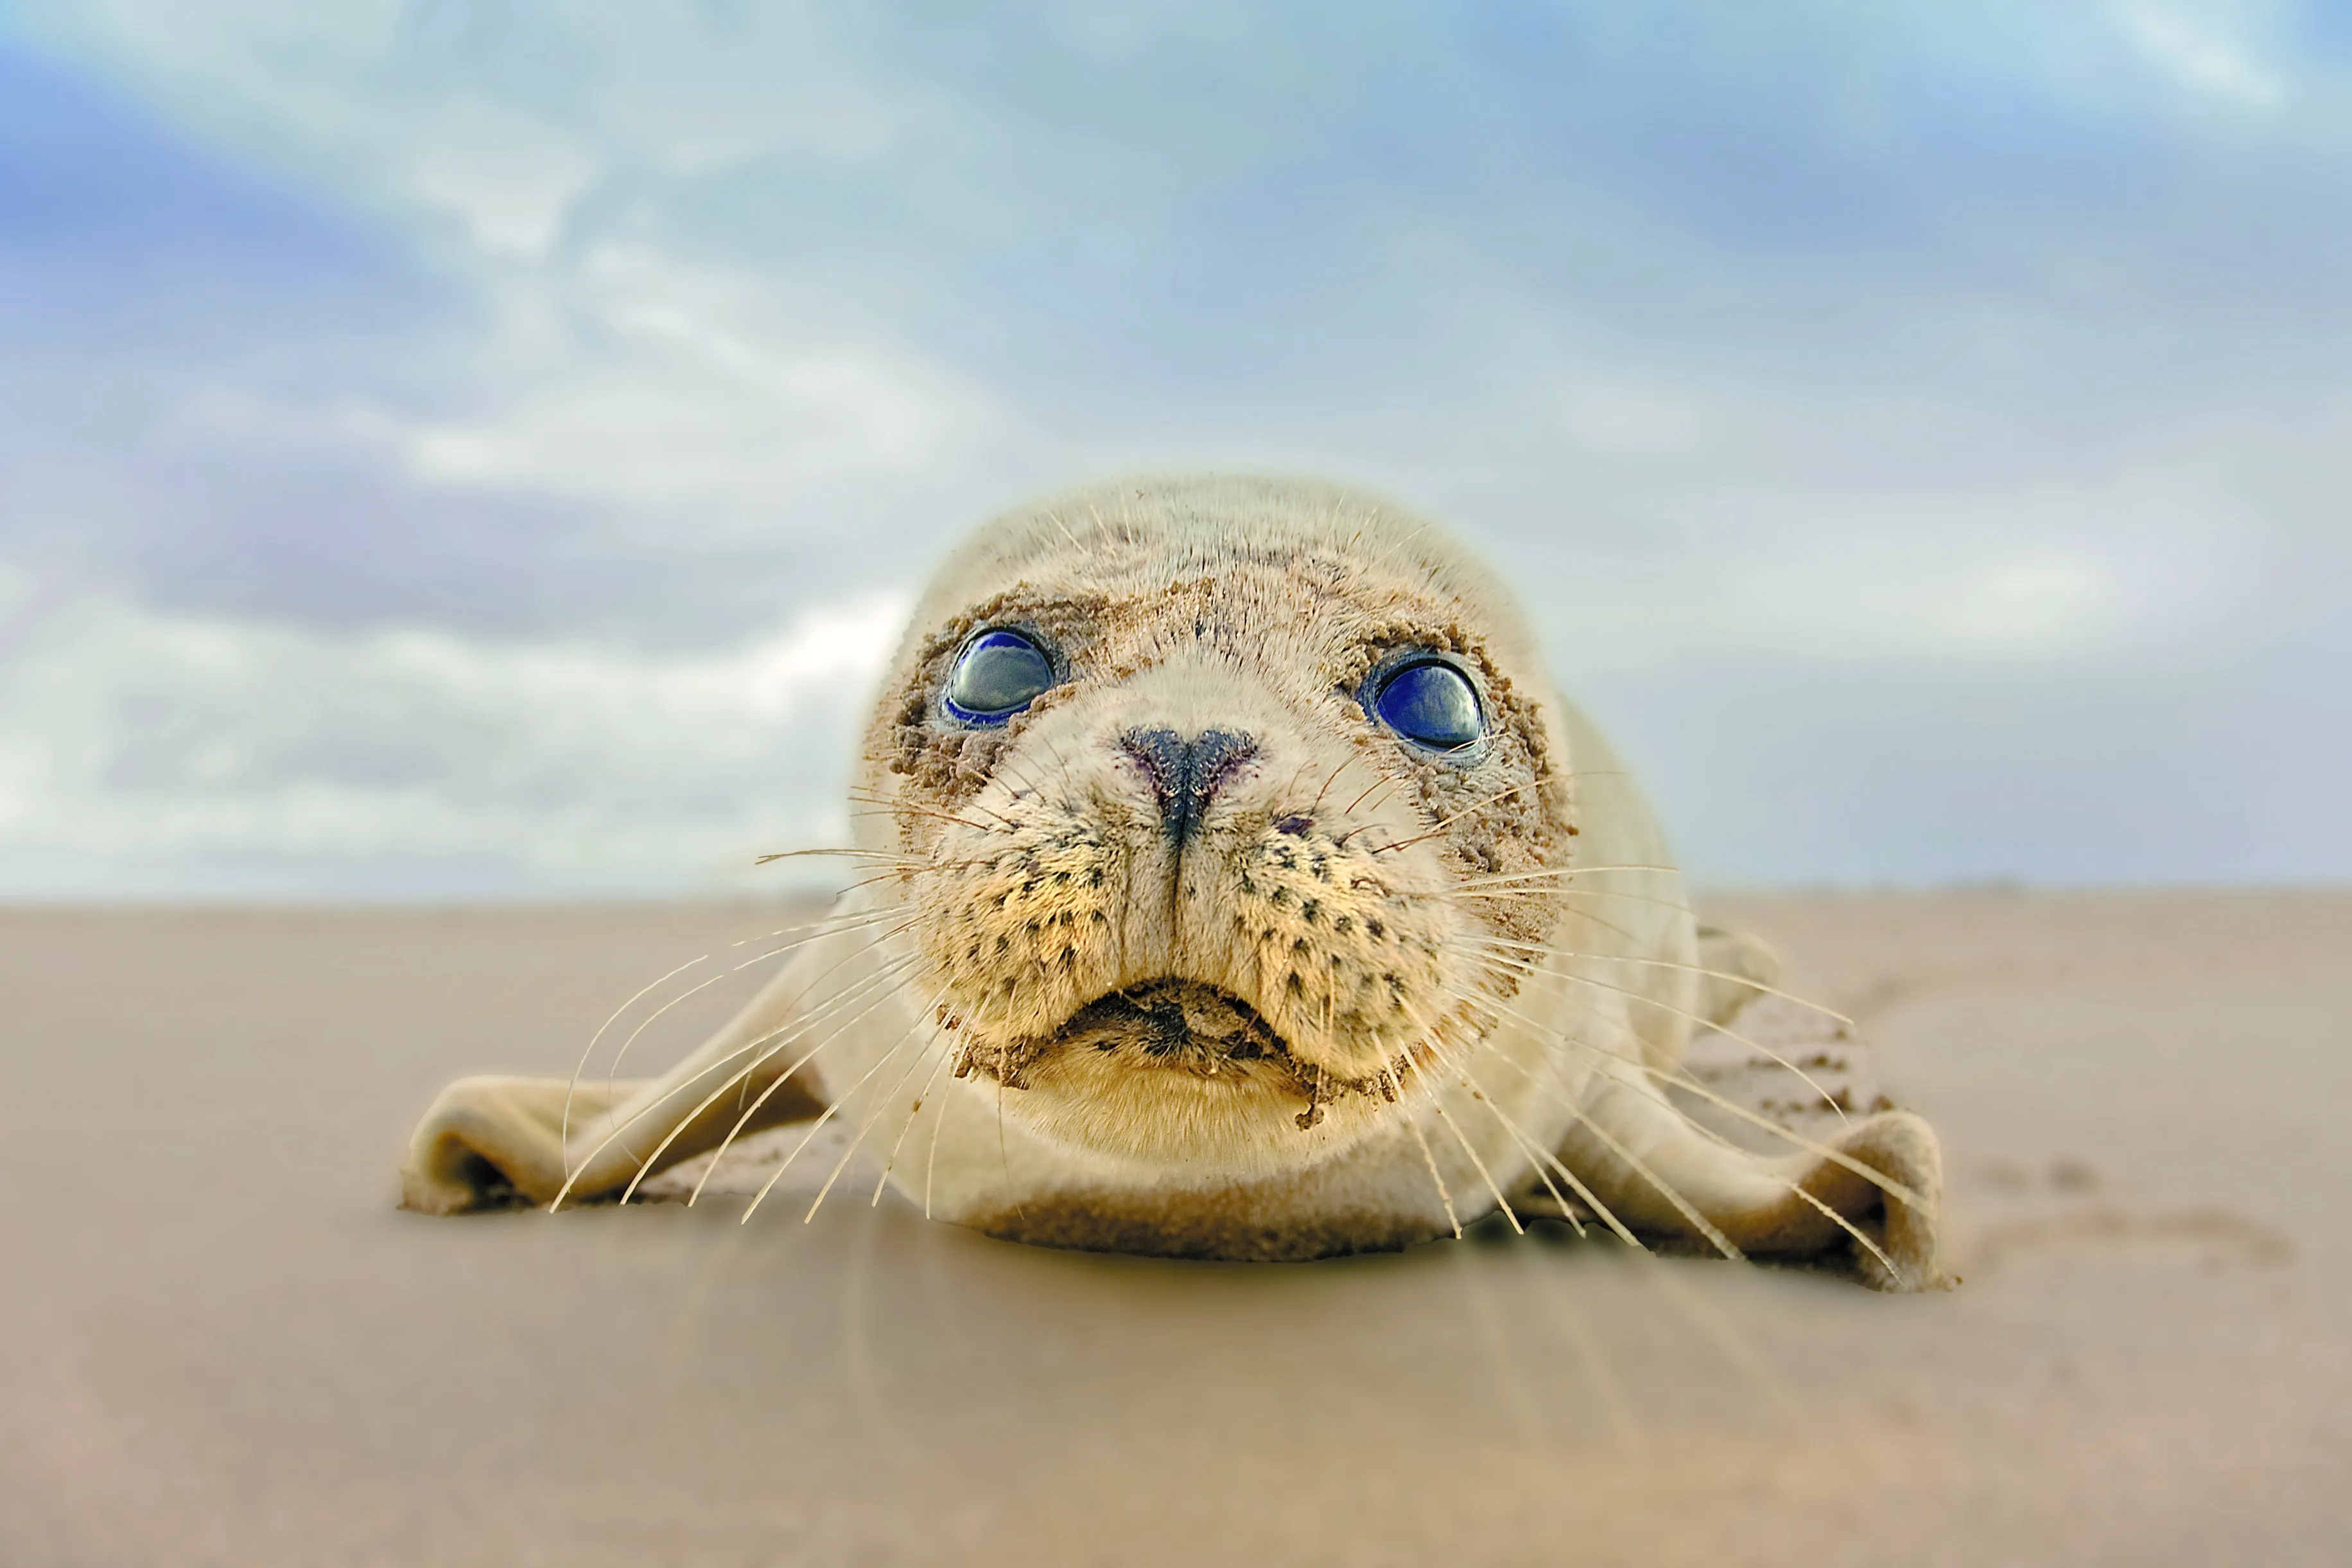 Young Harbour Seal on a sandy beach, looking down the camera lens